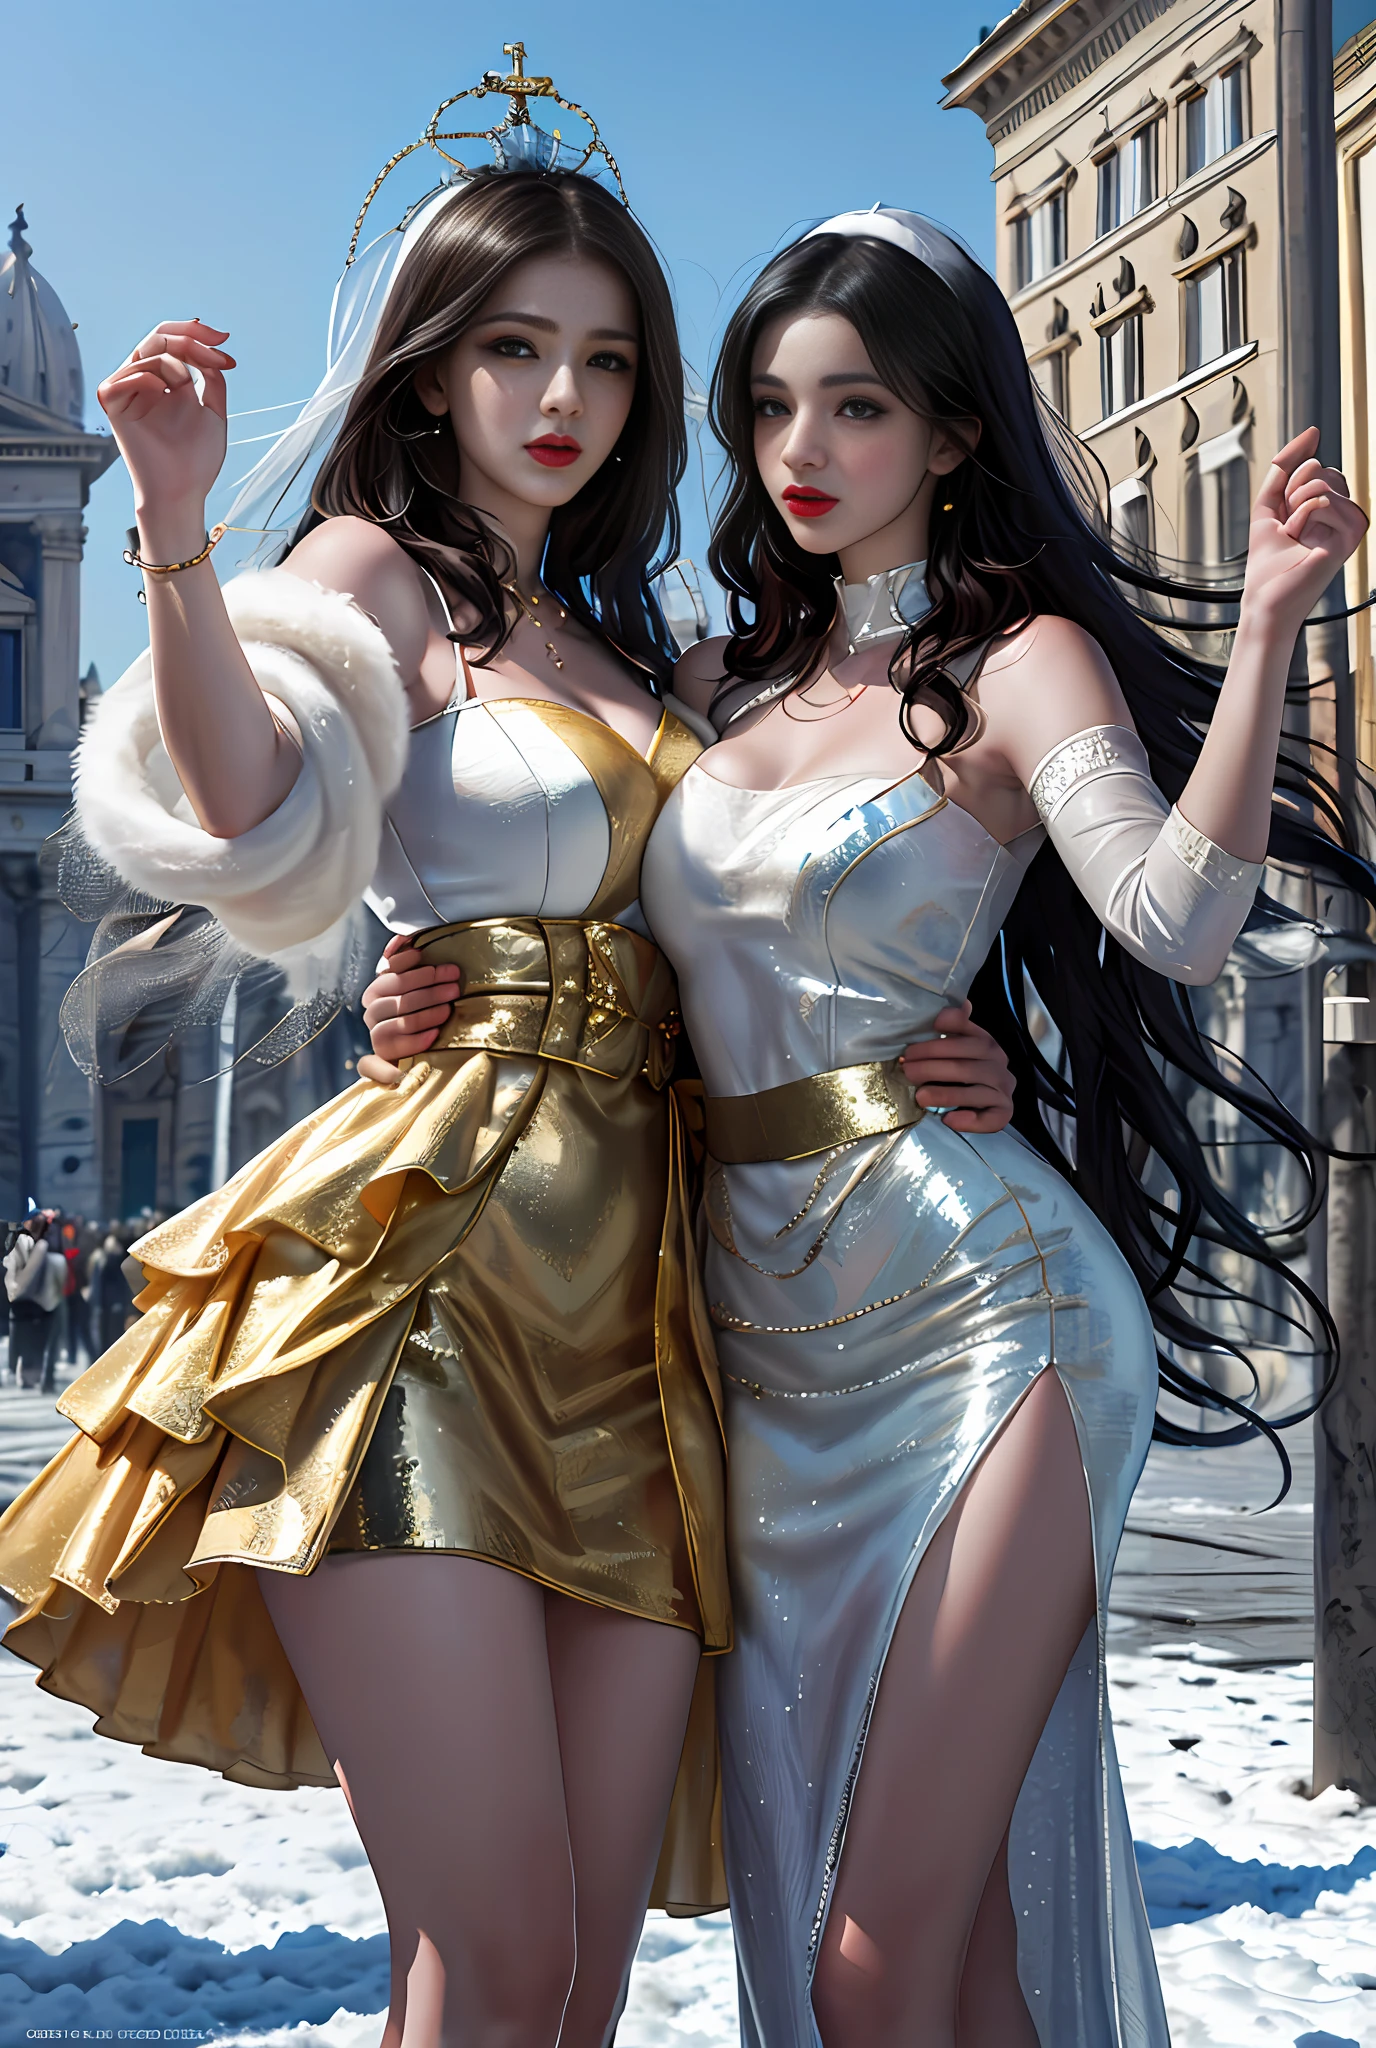 (Masterpiece, Best quality, Realistic),
2girls,duo,winter,snowy,(on the St. Peter's Square of Vatican,crowd of), st. Peter's Square of Vatican background,gypsy dress,(Princess Eyes,shiny pupils),Dancing,  Gold, banquet, crowd of, picking up skirt,
[Slight smile],